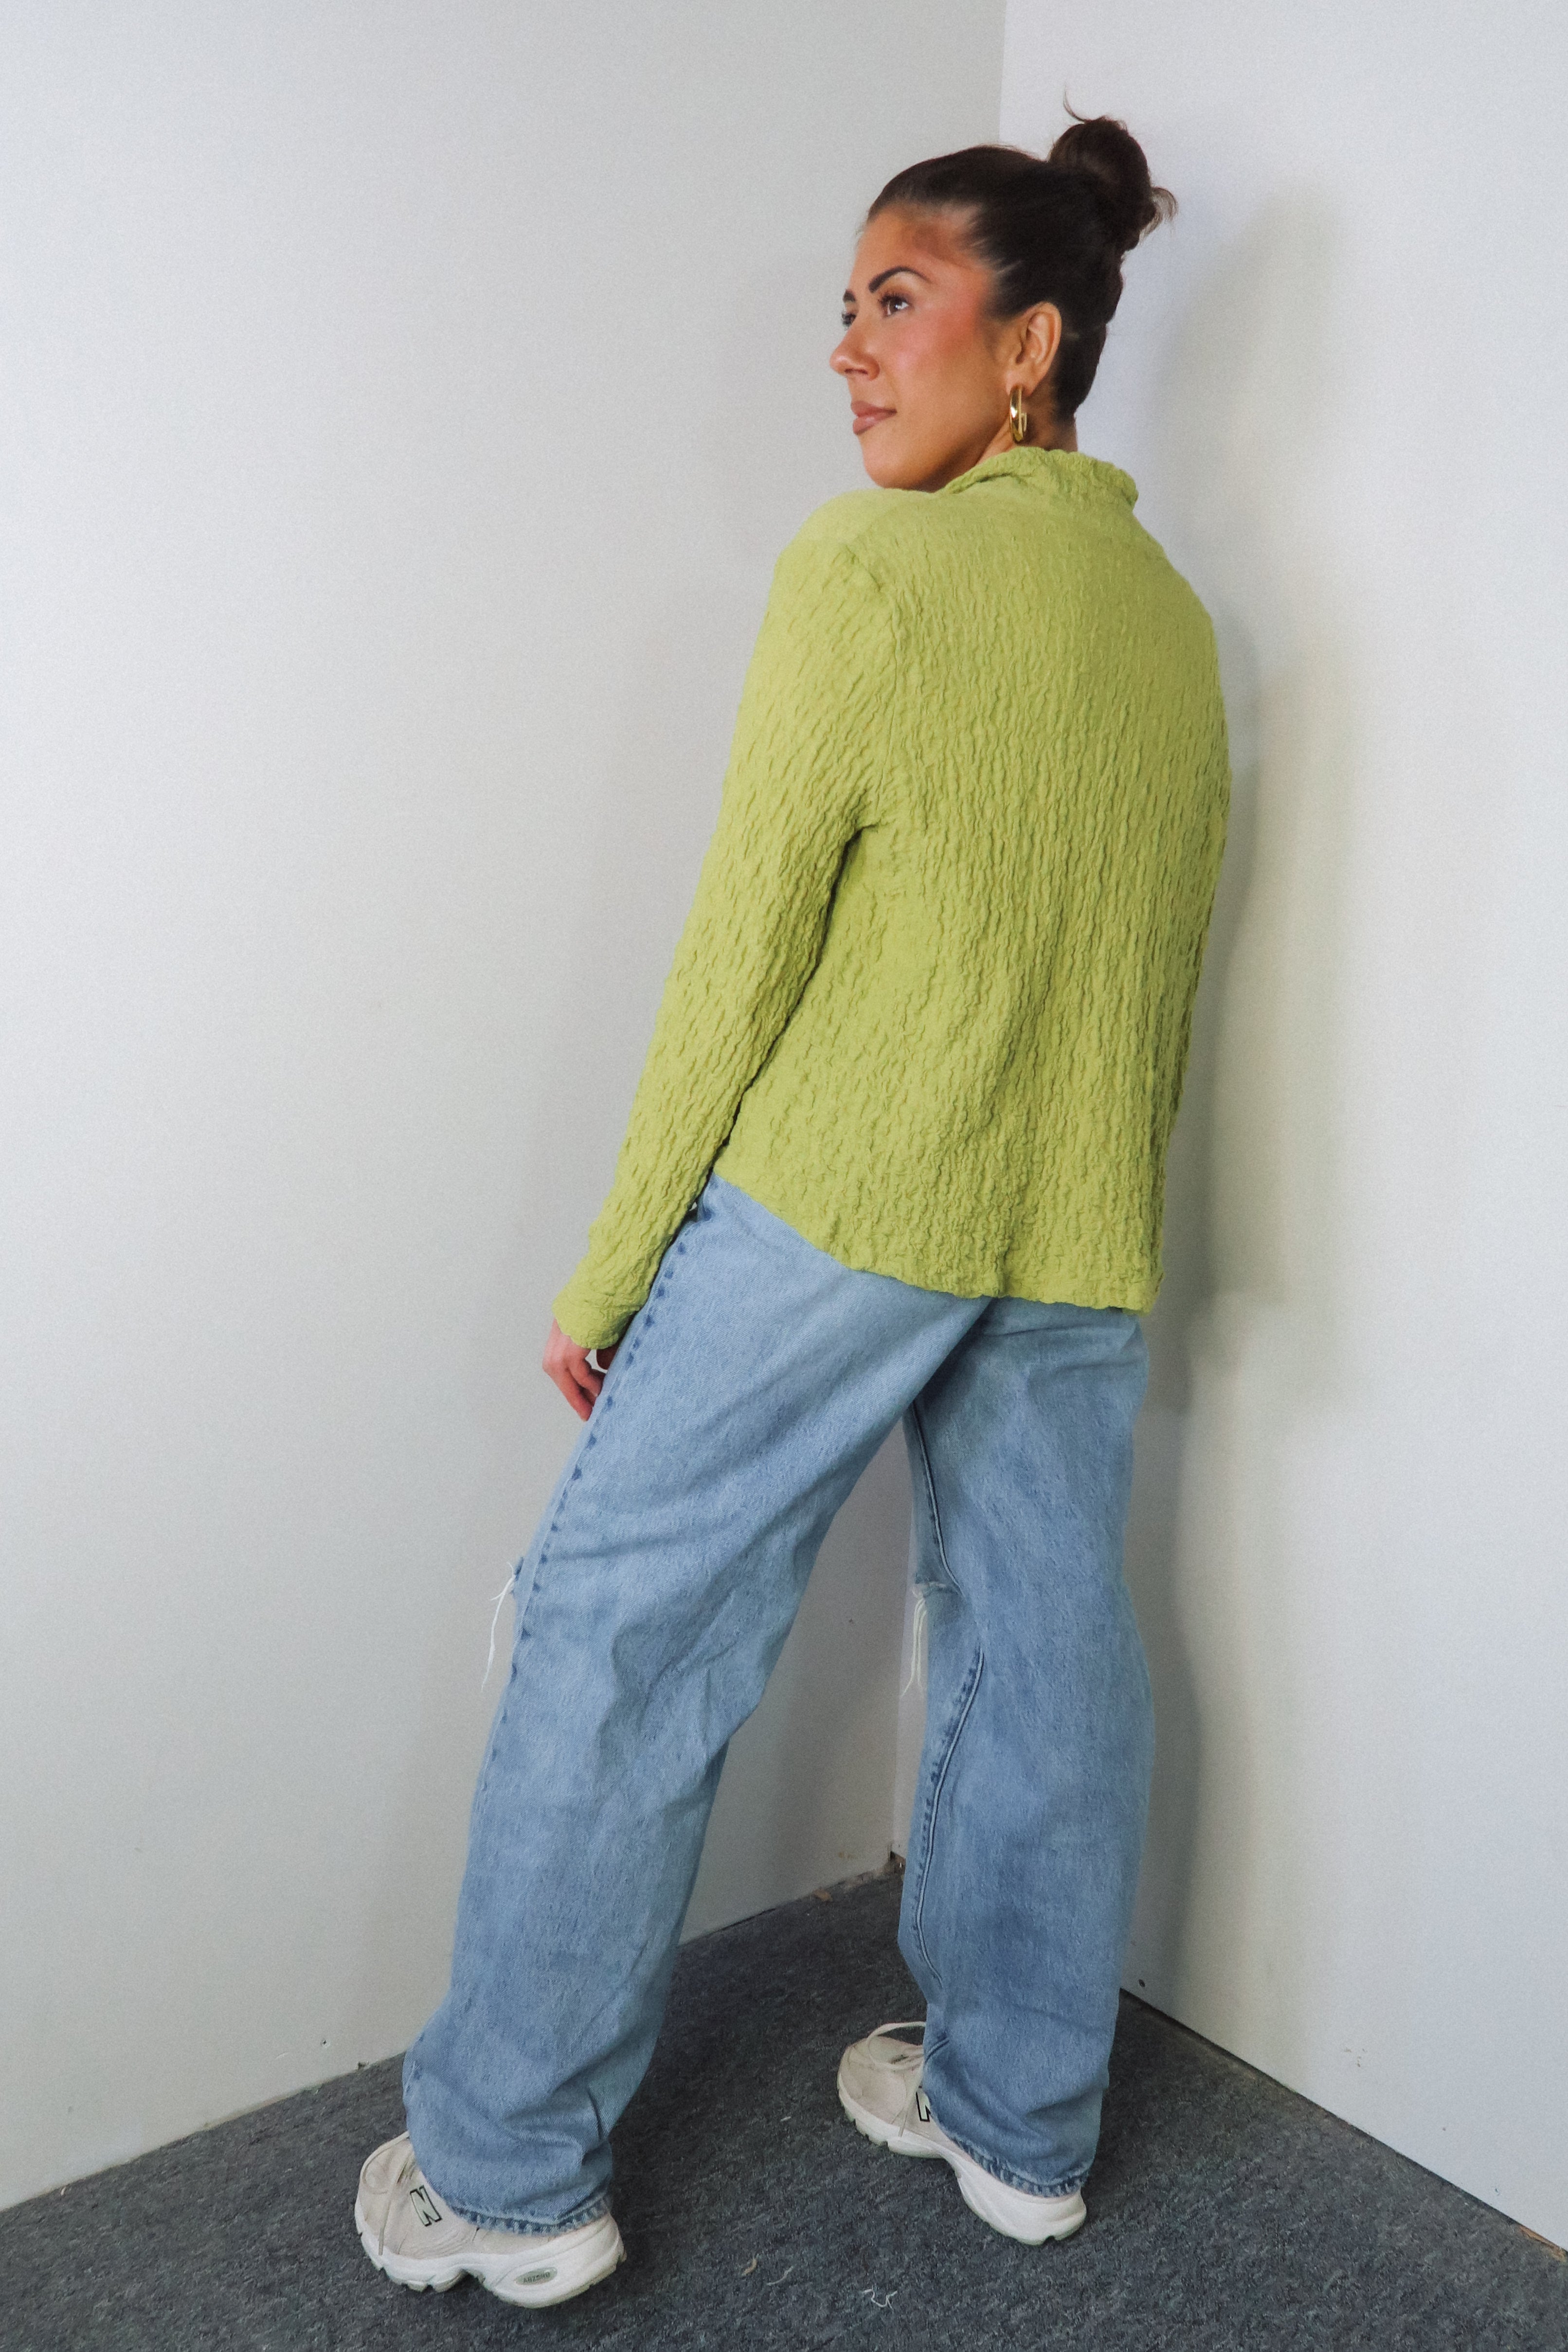 'Aubree' Knit Popcorn Button-Up Shirt - Tops - The Green Brick Boutique